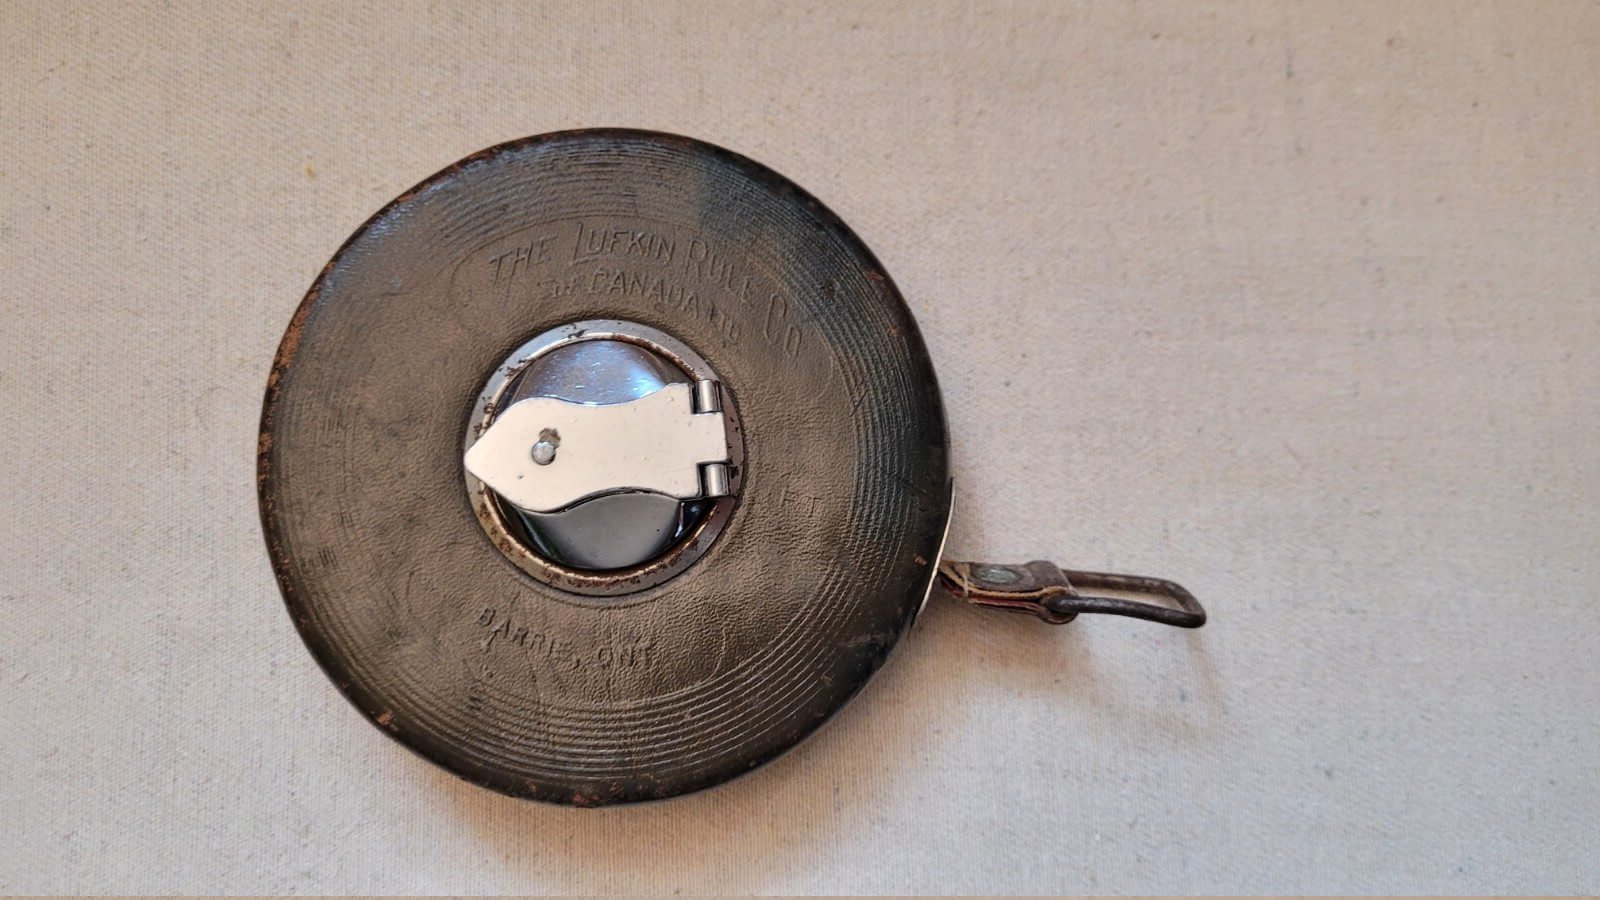 Vintage Lufkin Rule Co Canada tape measure with wind chrome hand crank and brown stitched leather, manufactured in Barrie, Ontario